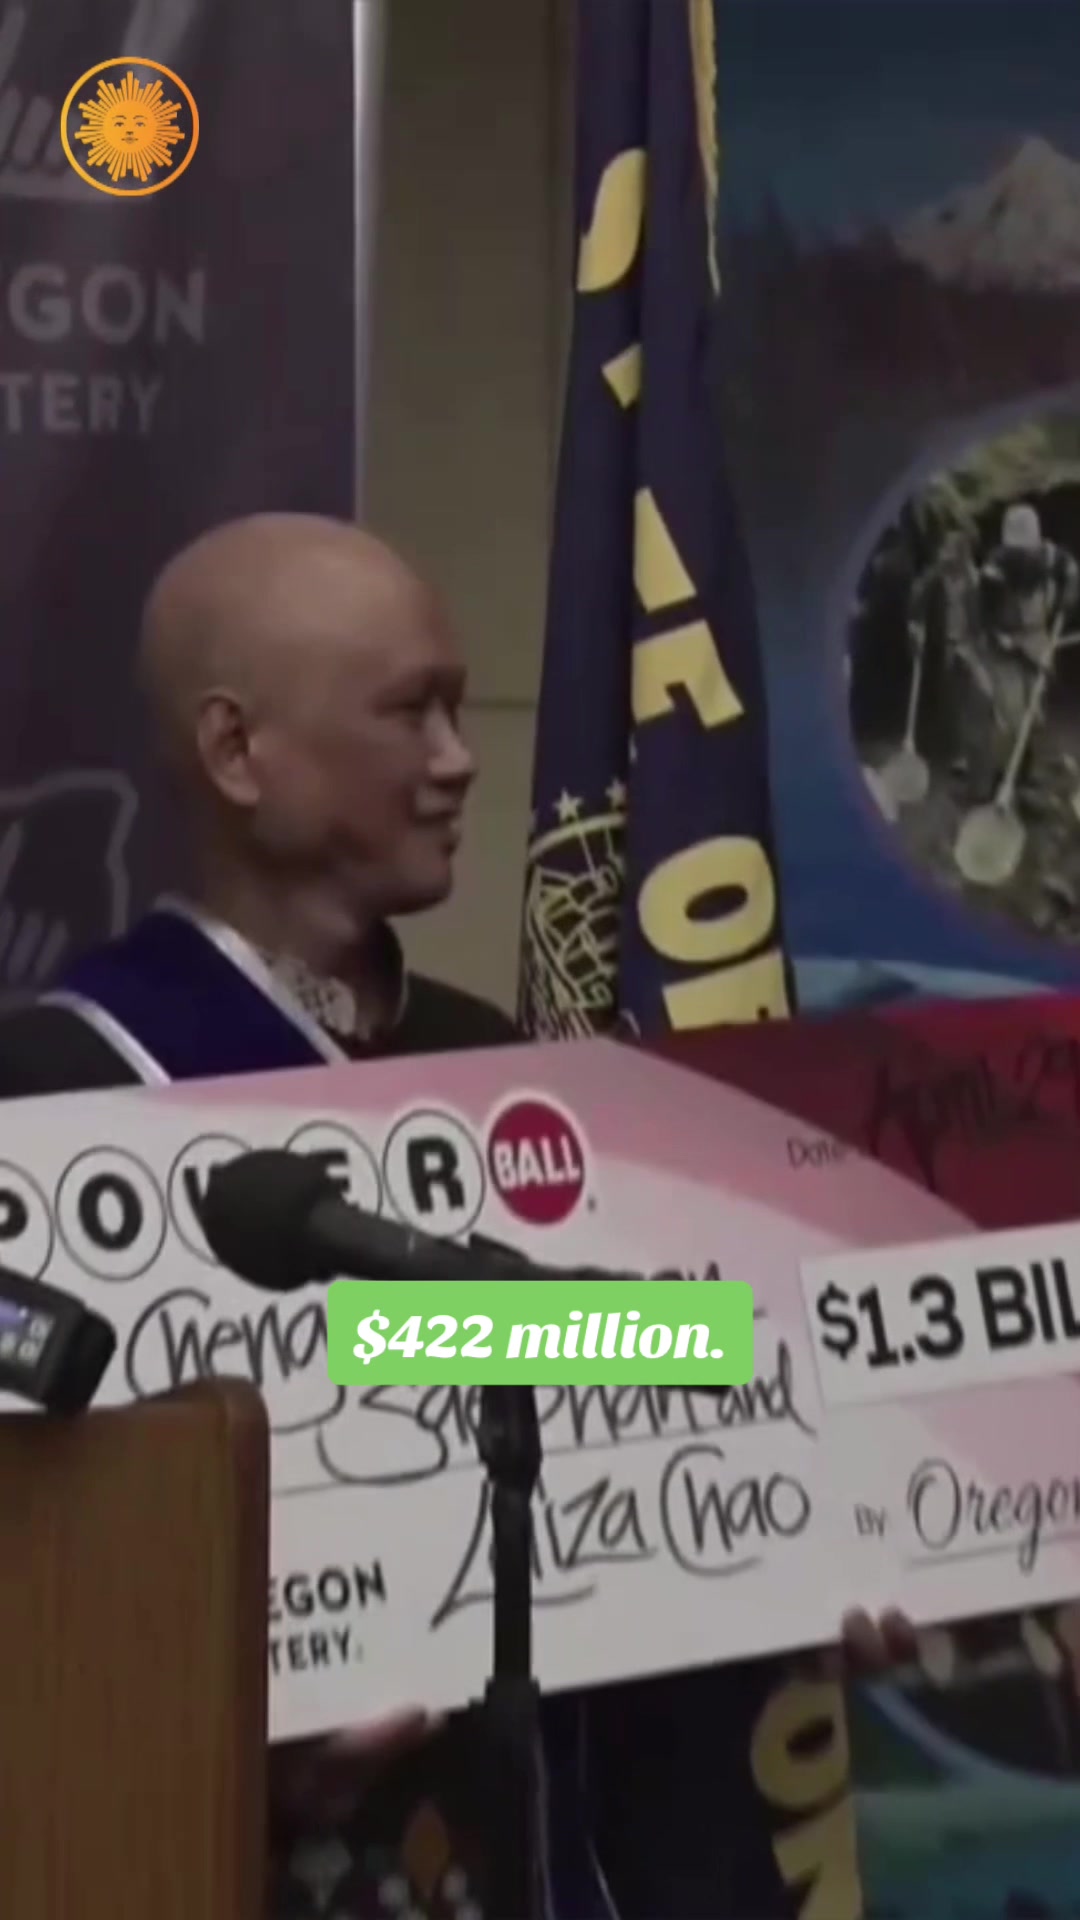 The winner of the $1.3 billion Powerball jackpot in Oregon last month is an immigrant from Laos who has been battling cancer for eight years: “My prayers were answered.” #powerball #lottery